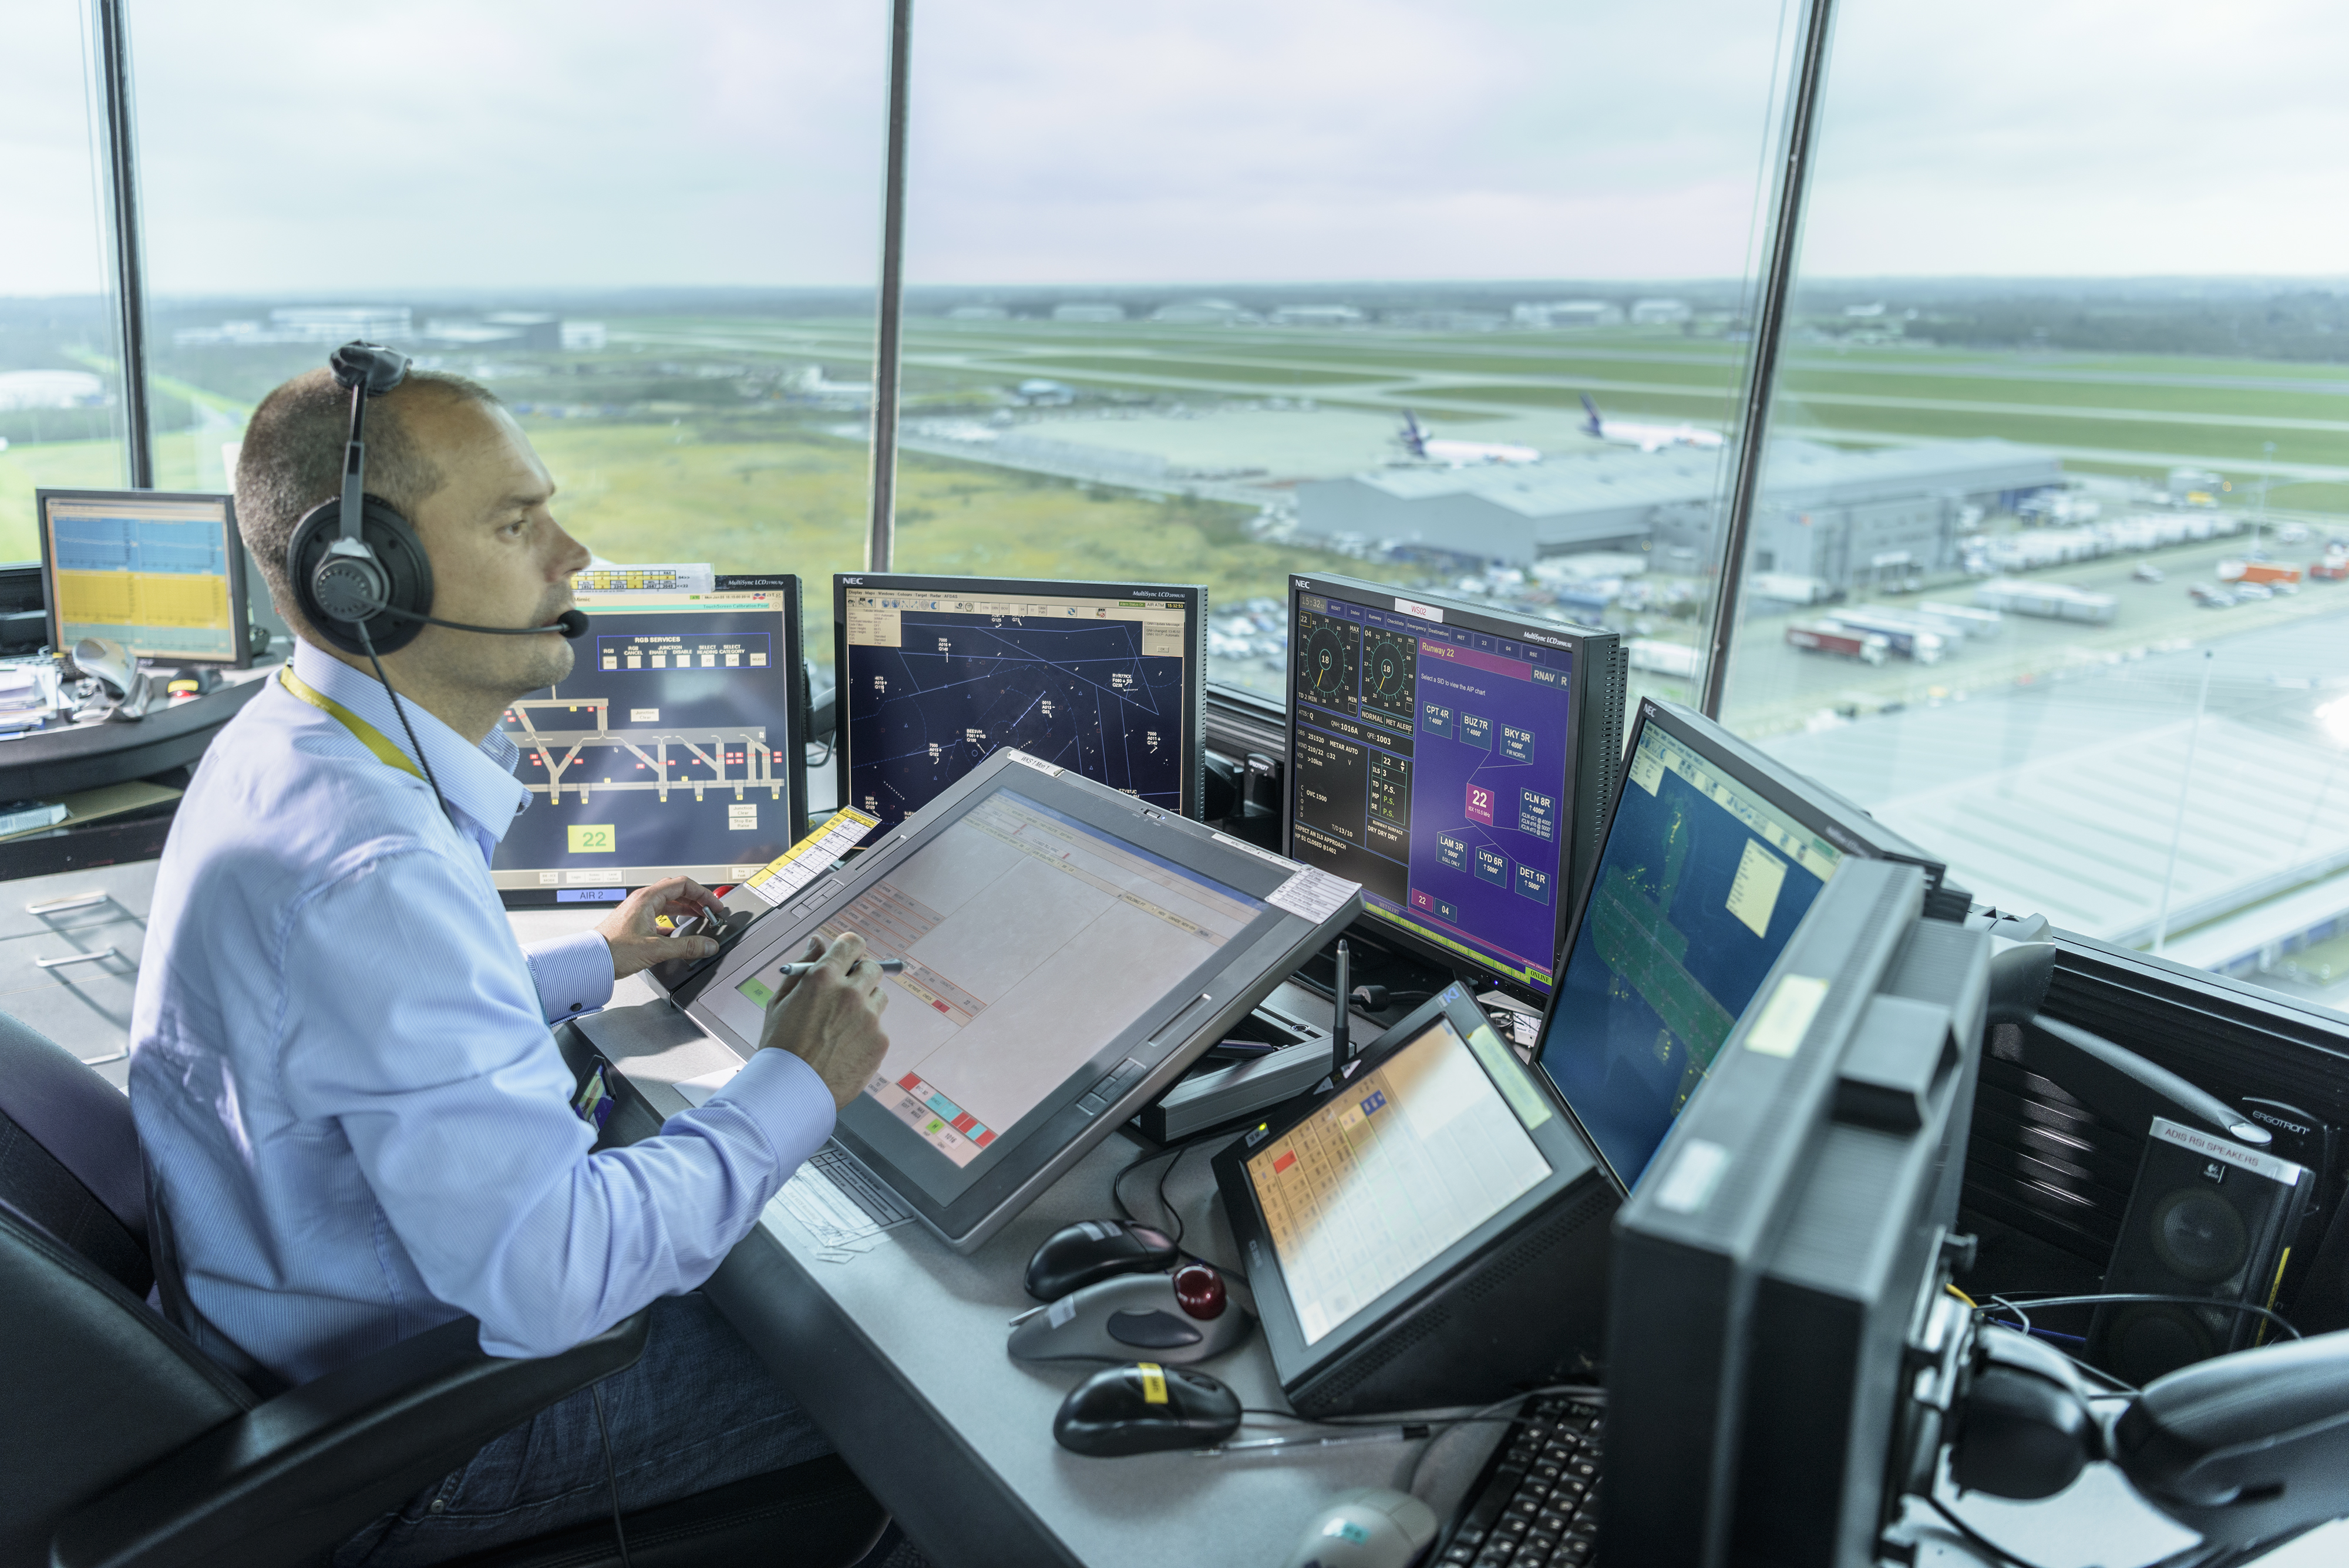 Inside Stansted control tower overlooking the FedEx operation